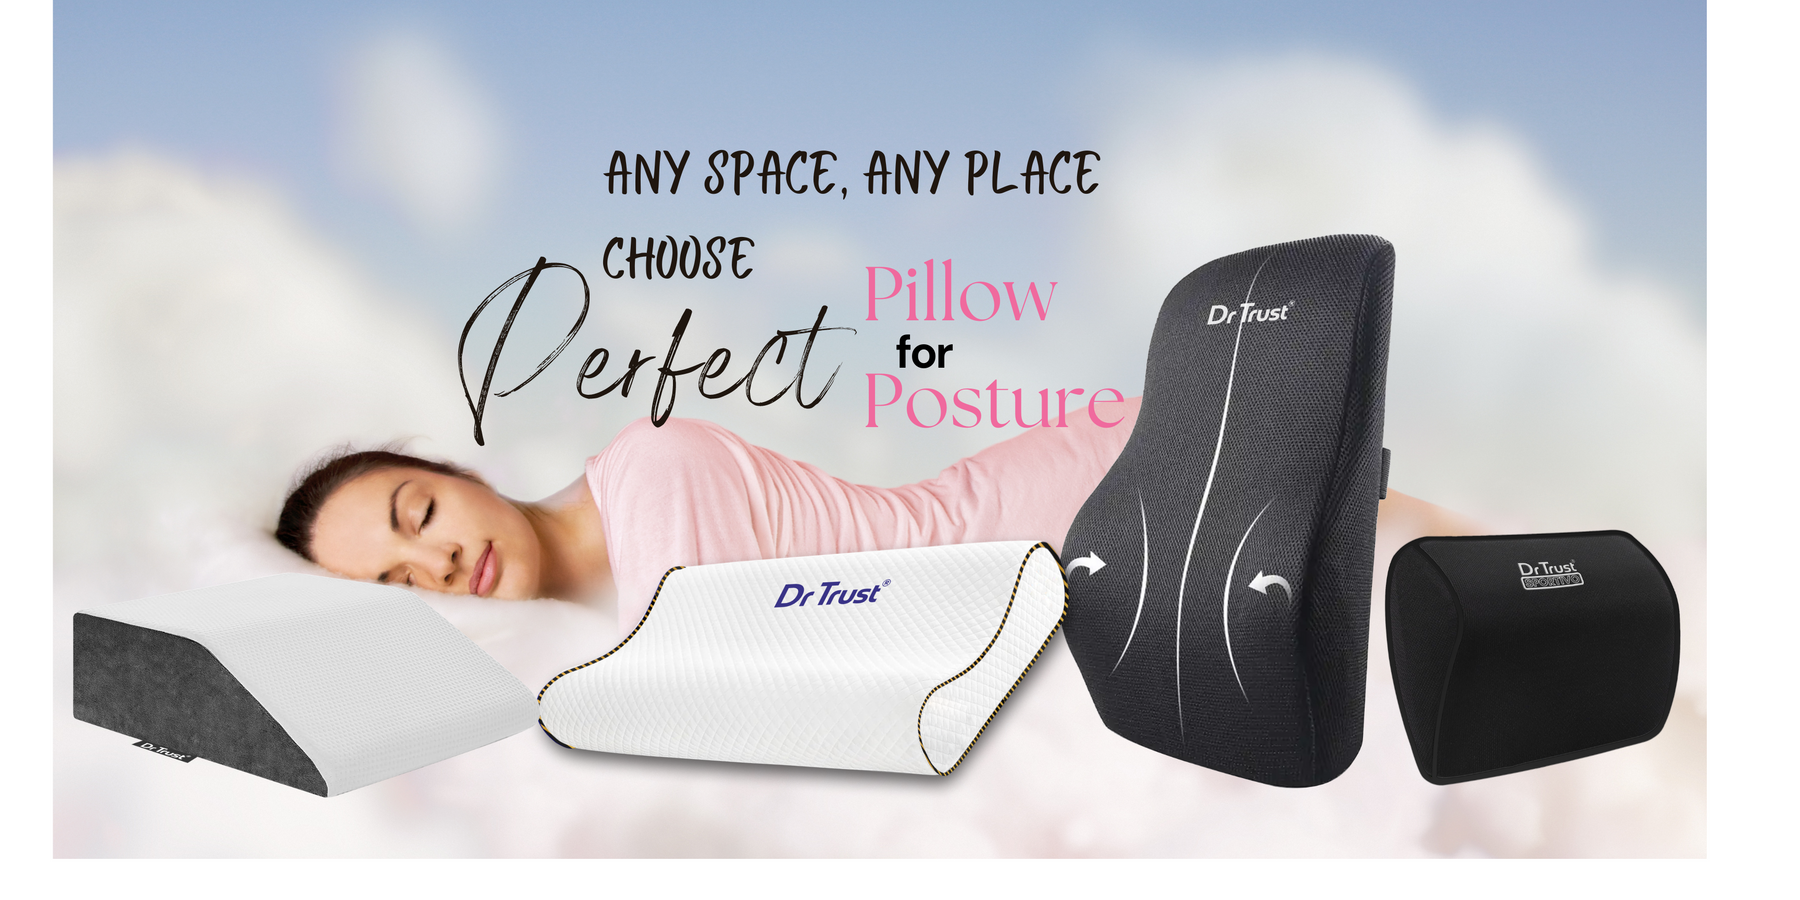 Choosing the Best Pillow for Your Neck Dr Trust Orthopedic Support Pillows